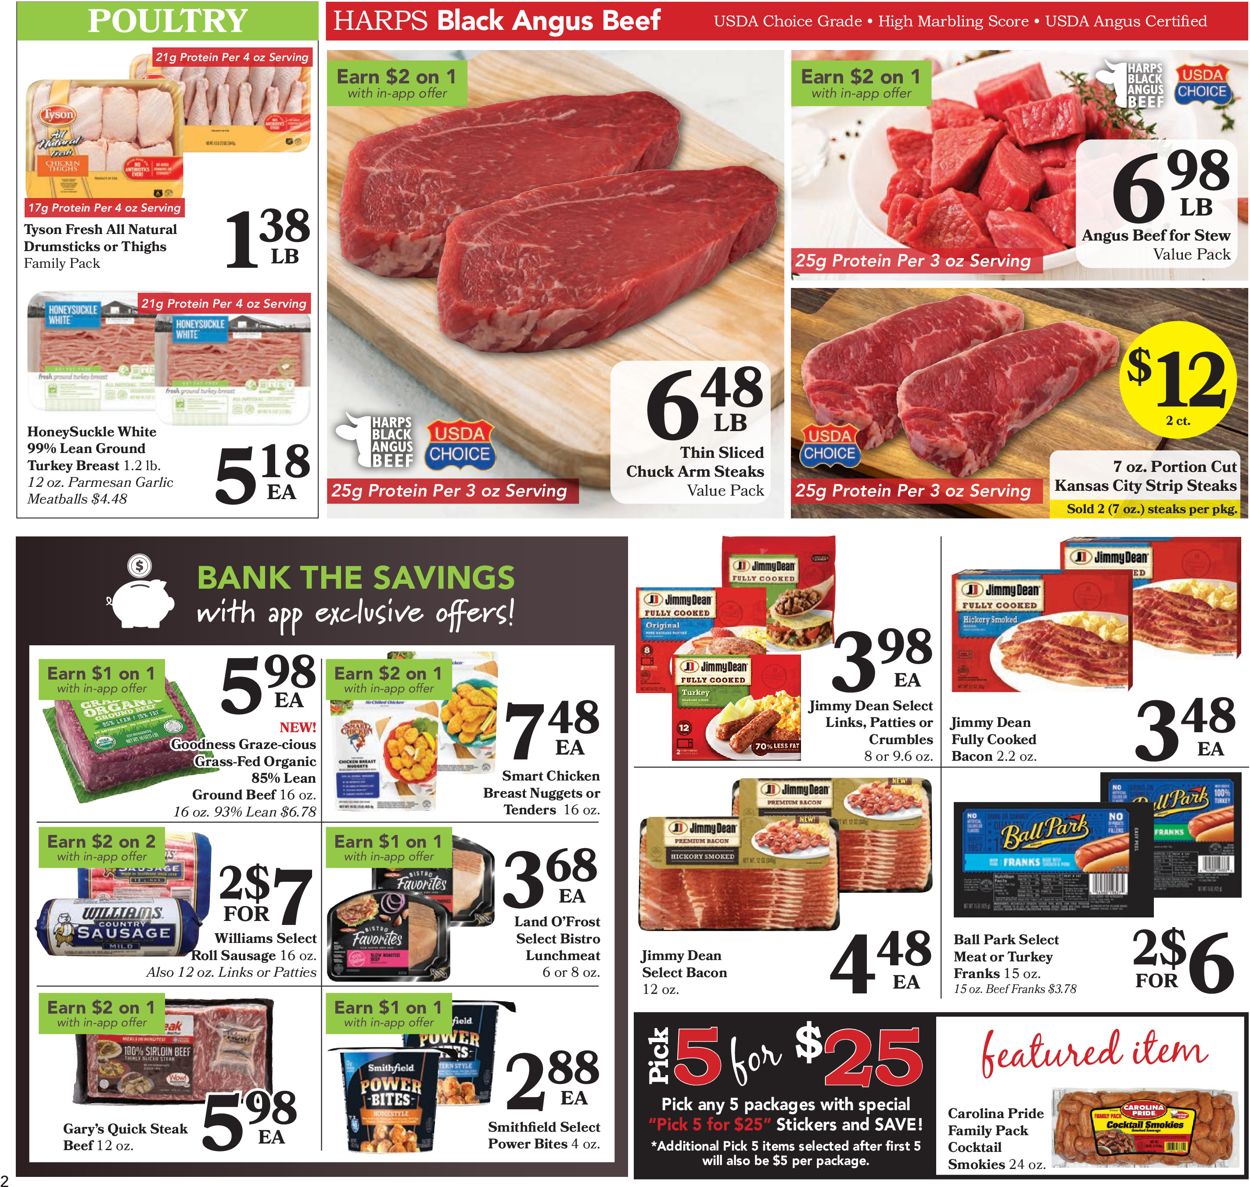 Catalogue Harps Foods from 11/03/2021